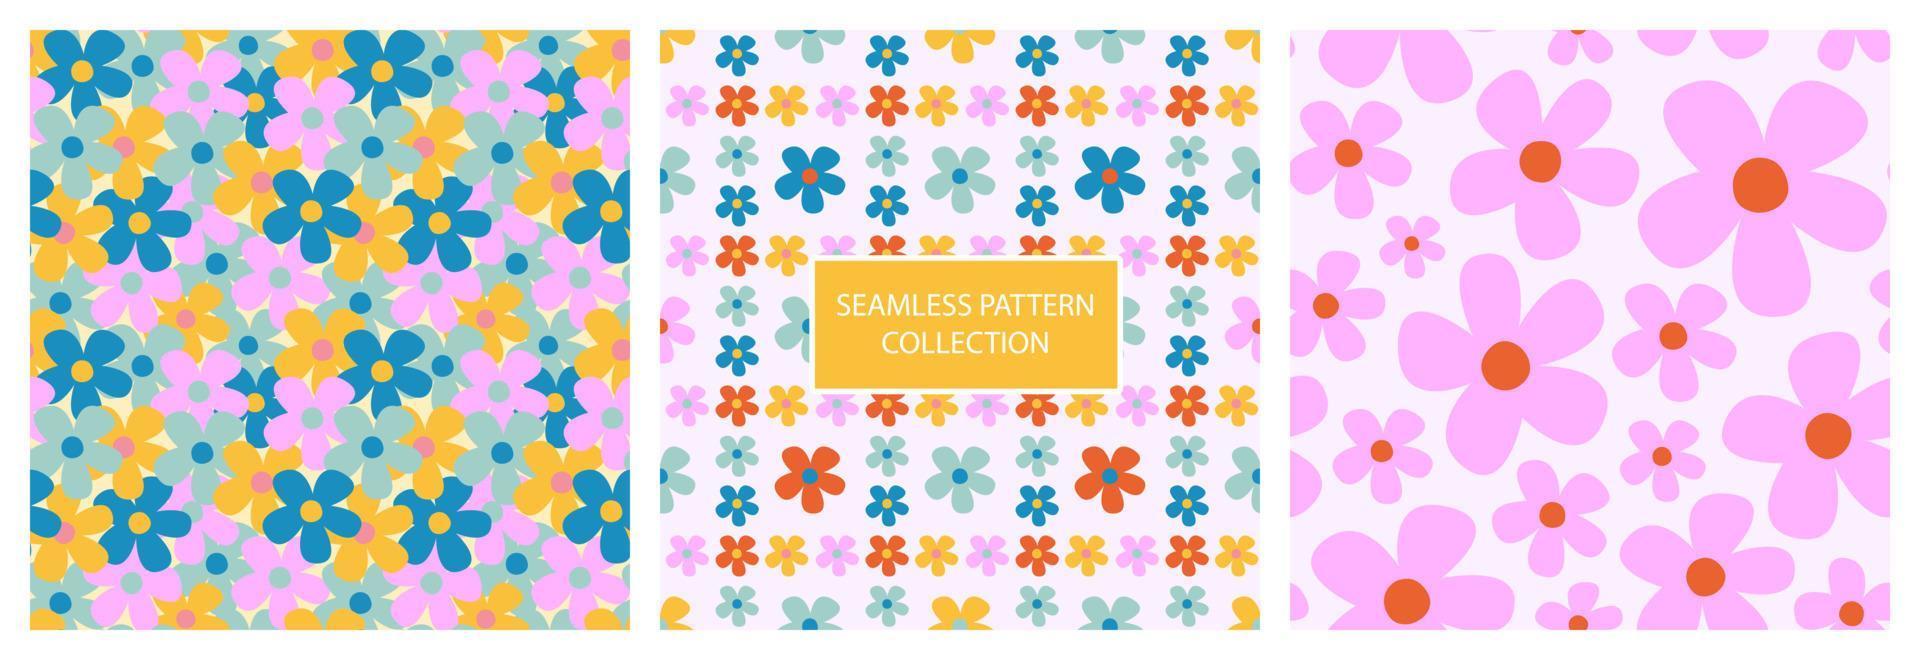 Set of abstract seamless patterns with groovy daisy flowers. Three colorful retro floral vector wallpaper for surface design. Decorative hippy vintage floral background.